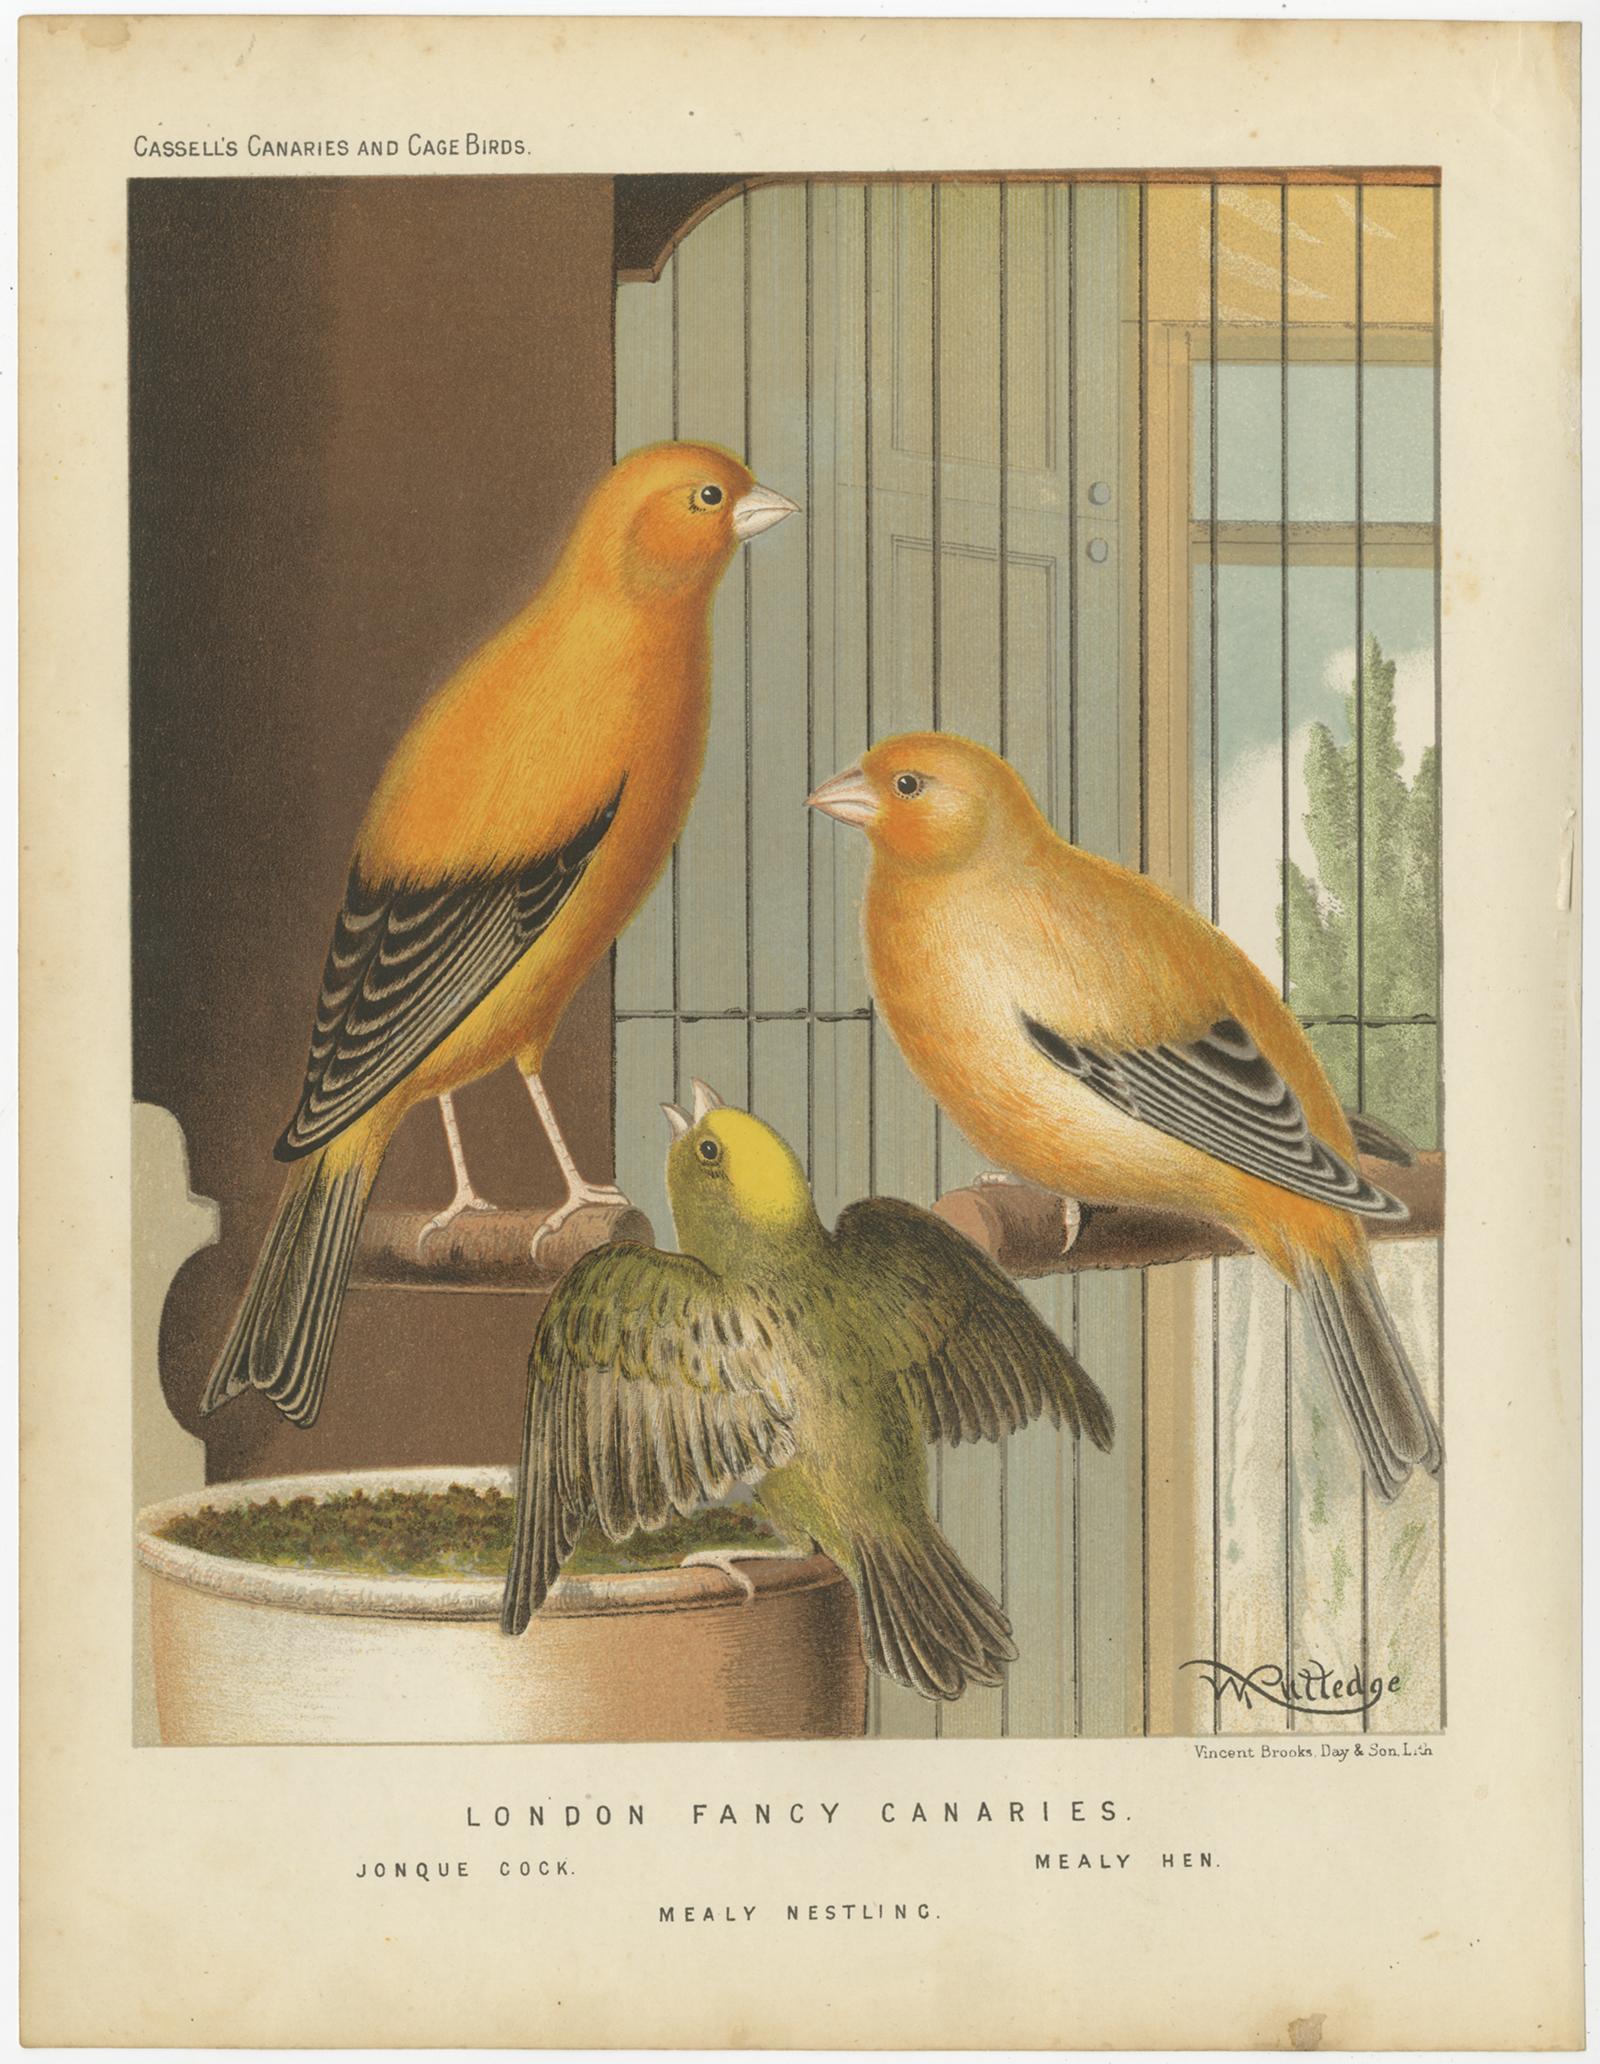 Antique bird print titled 'London Fancy Canaries 1. Jonque Cock 2. Mealy Hen 3. Mealy Nestling' Old bird print depicting the Jonque Cock, Mealy Hen, Mealy Nestling. This print originates from: 'Illustrated book of canaries and cage-birds' by W. A.